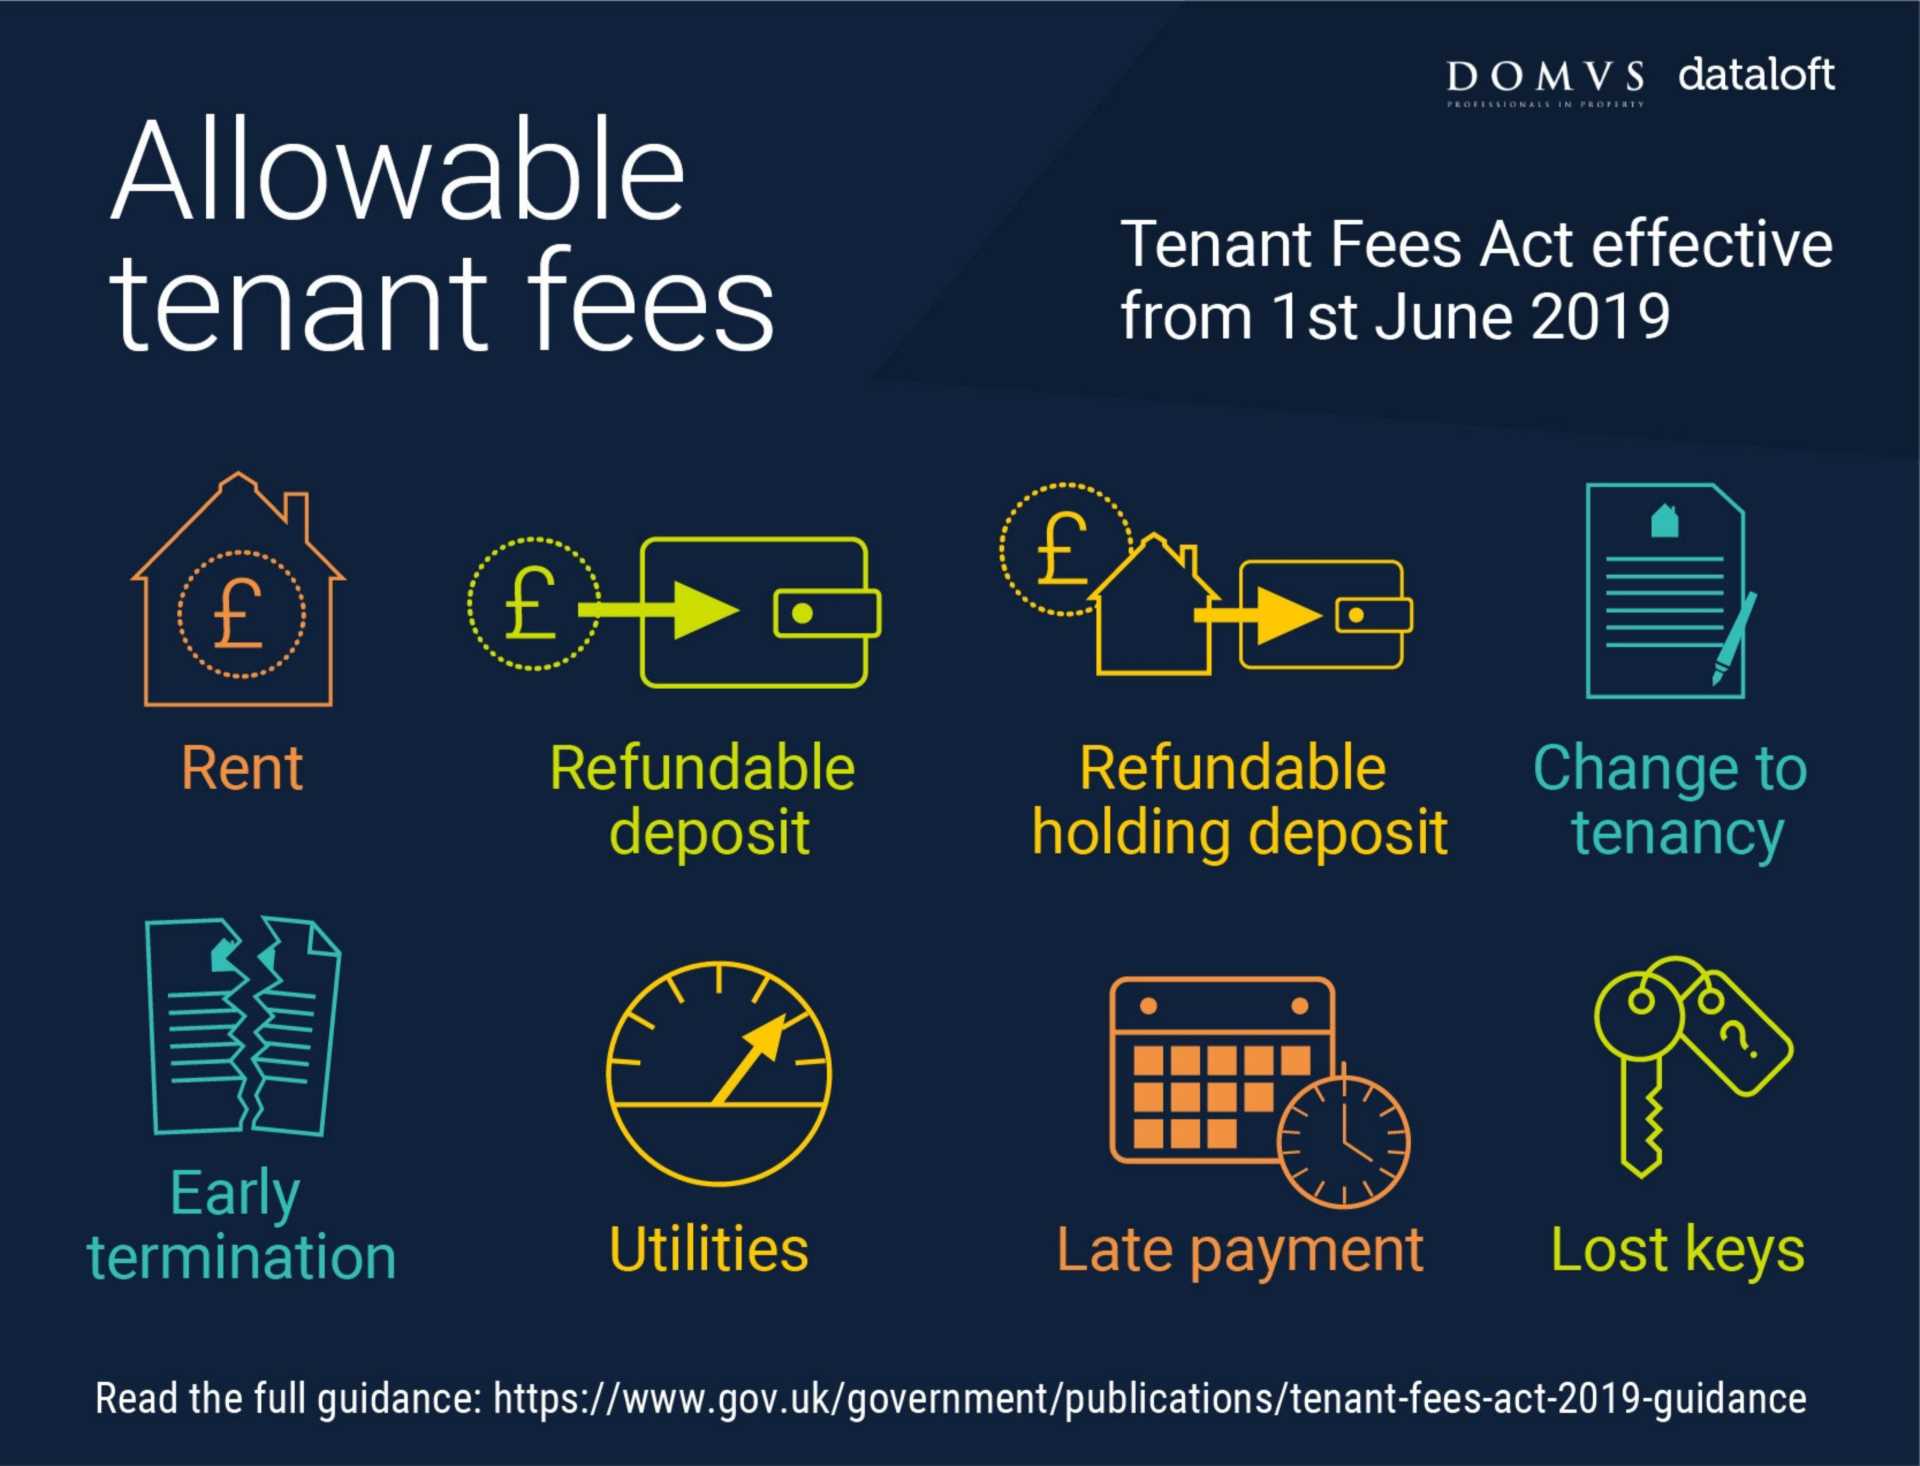 The Tenant Fees Act 2019